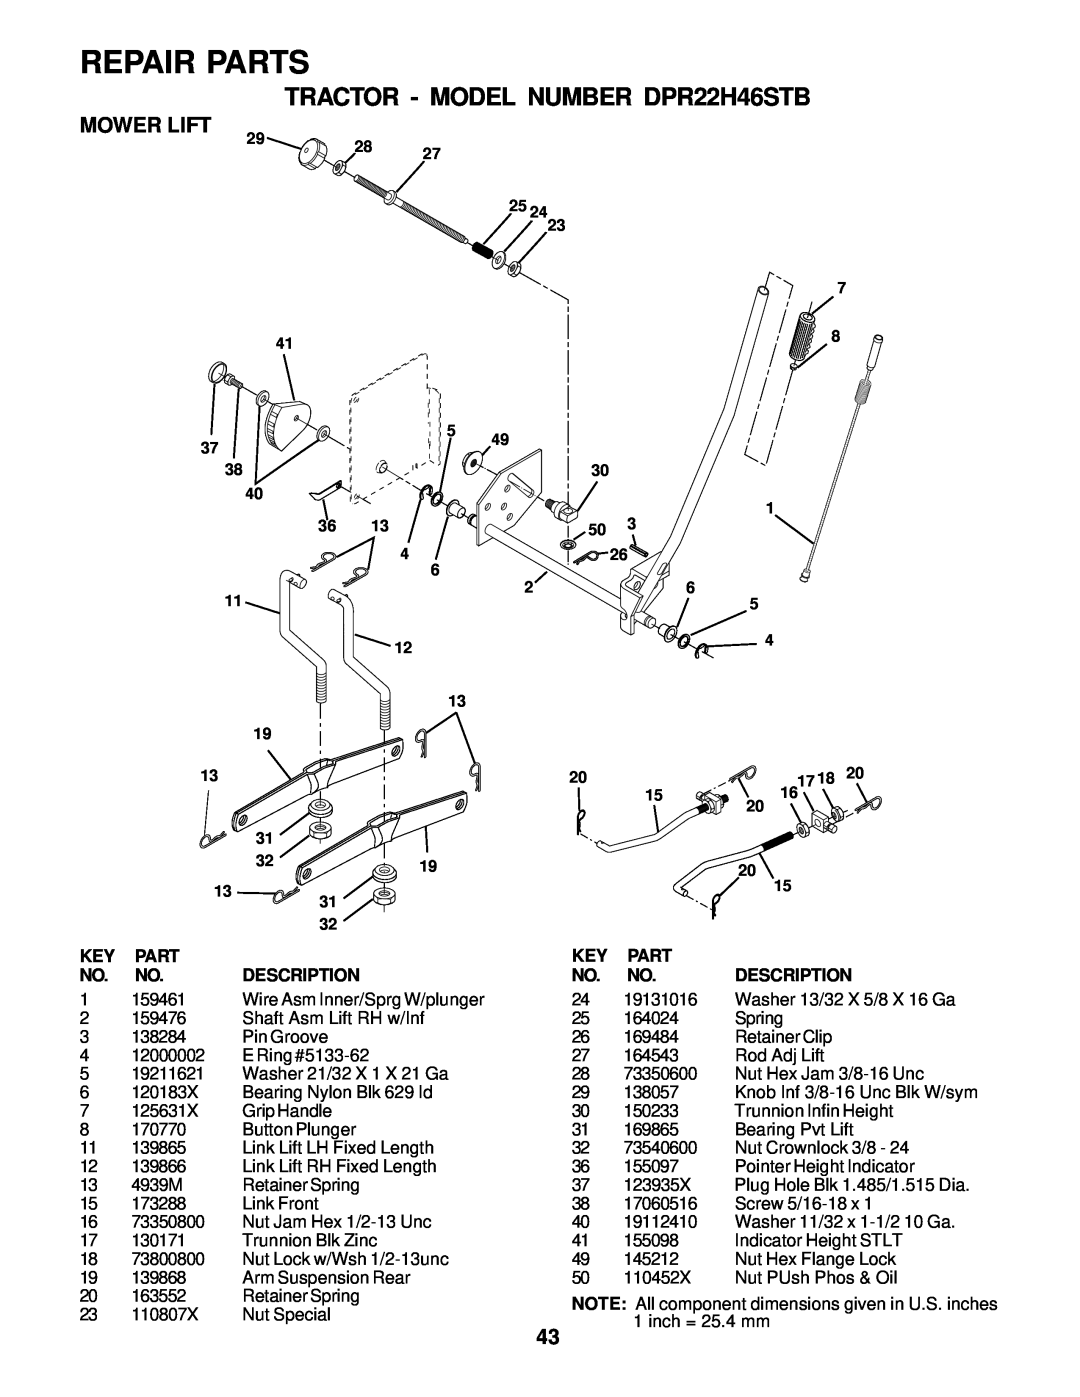 Poulan 178249 owner manual Mower Lift, Repair Parts, TRACTOR - MODEL NUMBER DPR22H46STB 